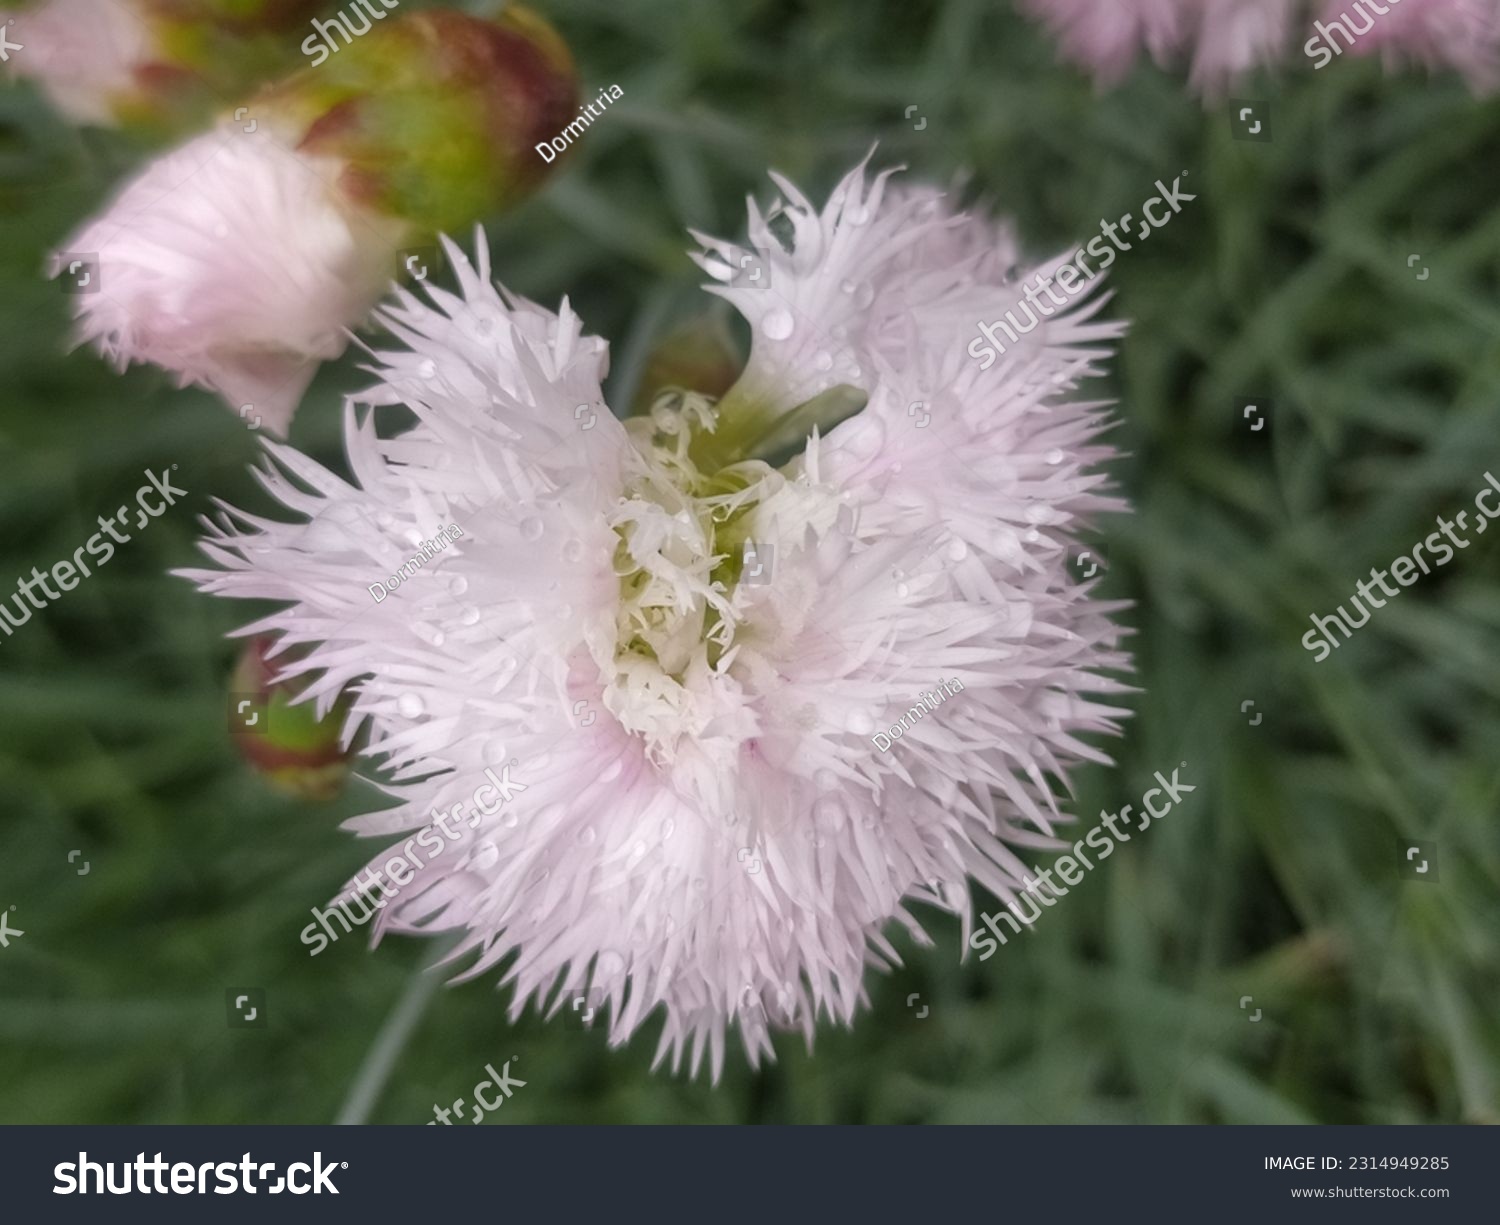 Jagged carnation, white and pink flowers, rural garden in Poland. #2314949285